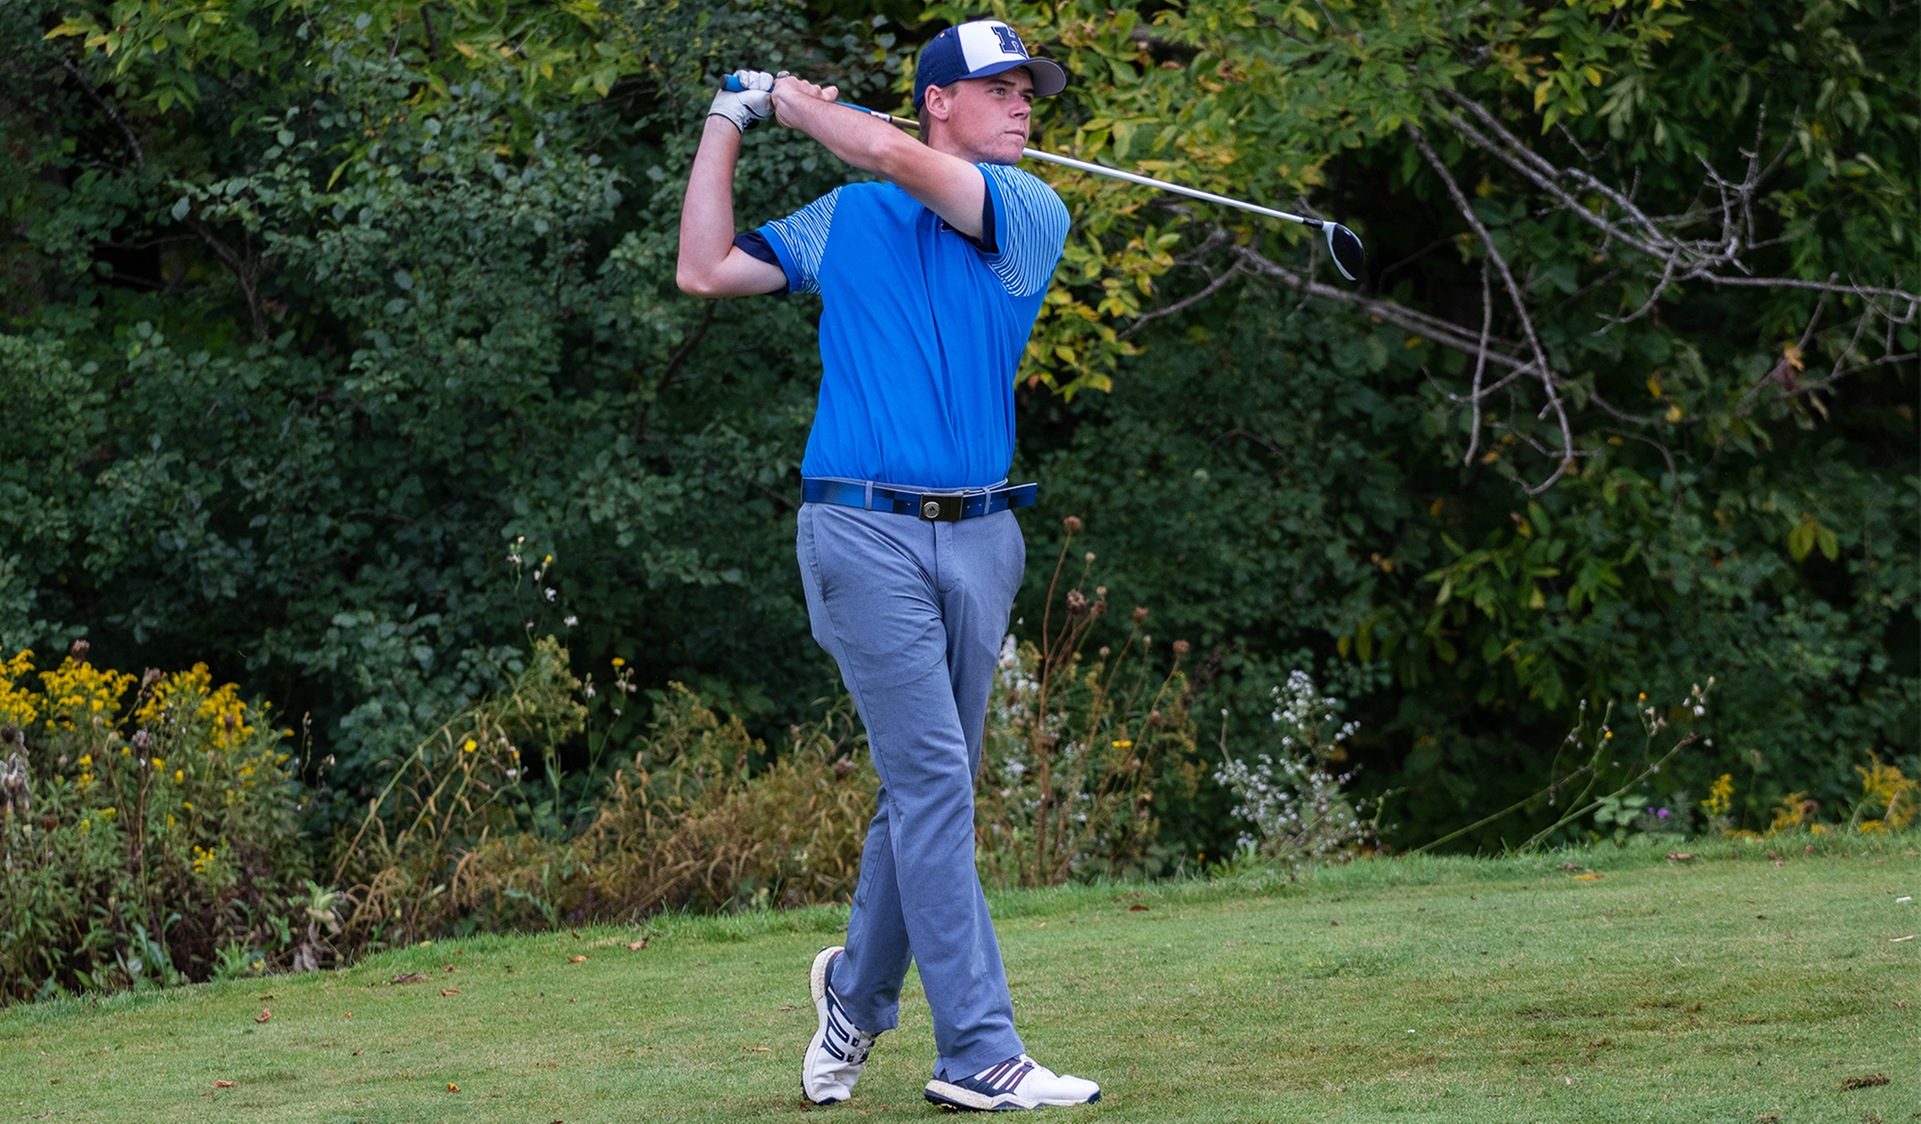 Humber Golf Concludes Season with Seventh-Place Finish